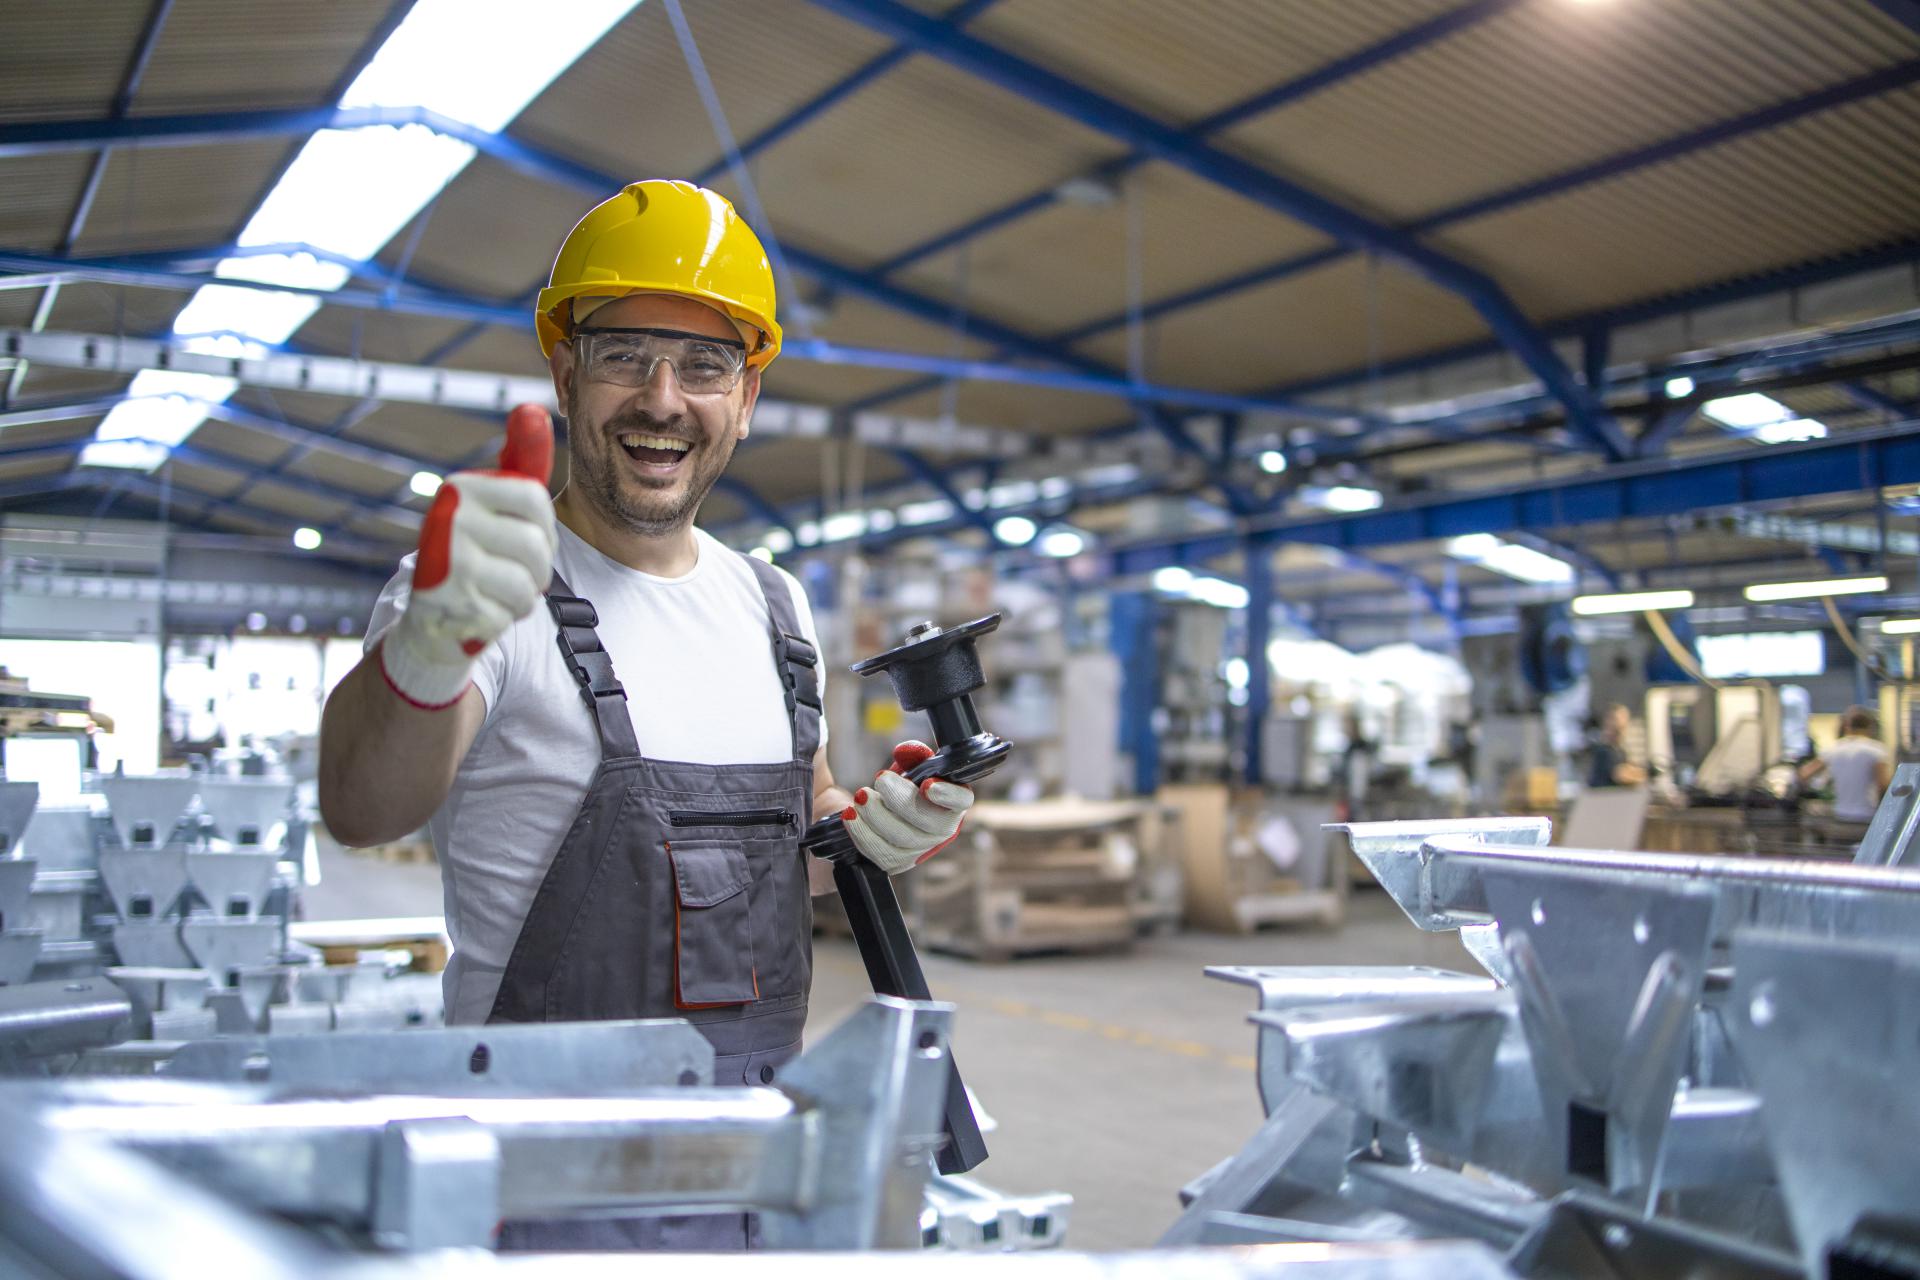 981portrait-of-factory-worker-in-protective-equipment-holding-thumbs-up-in-production-hall.jpg